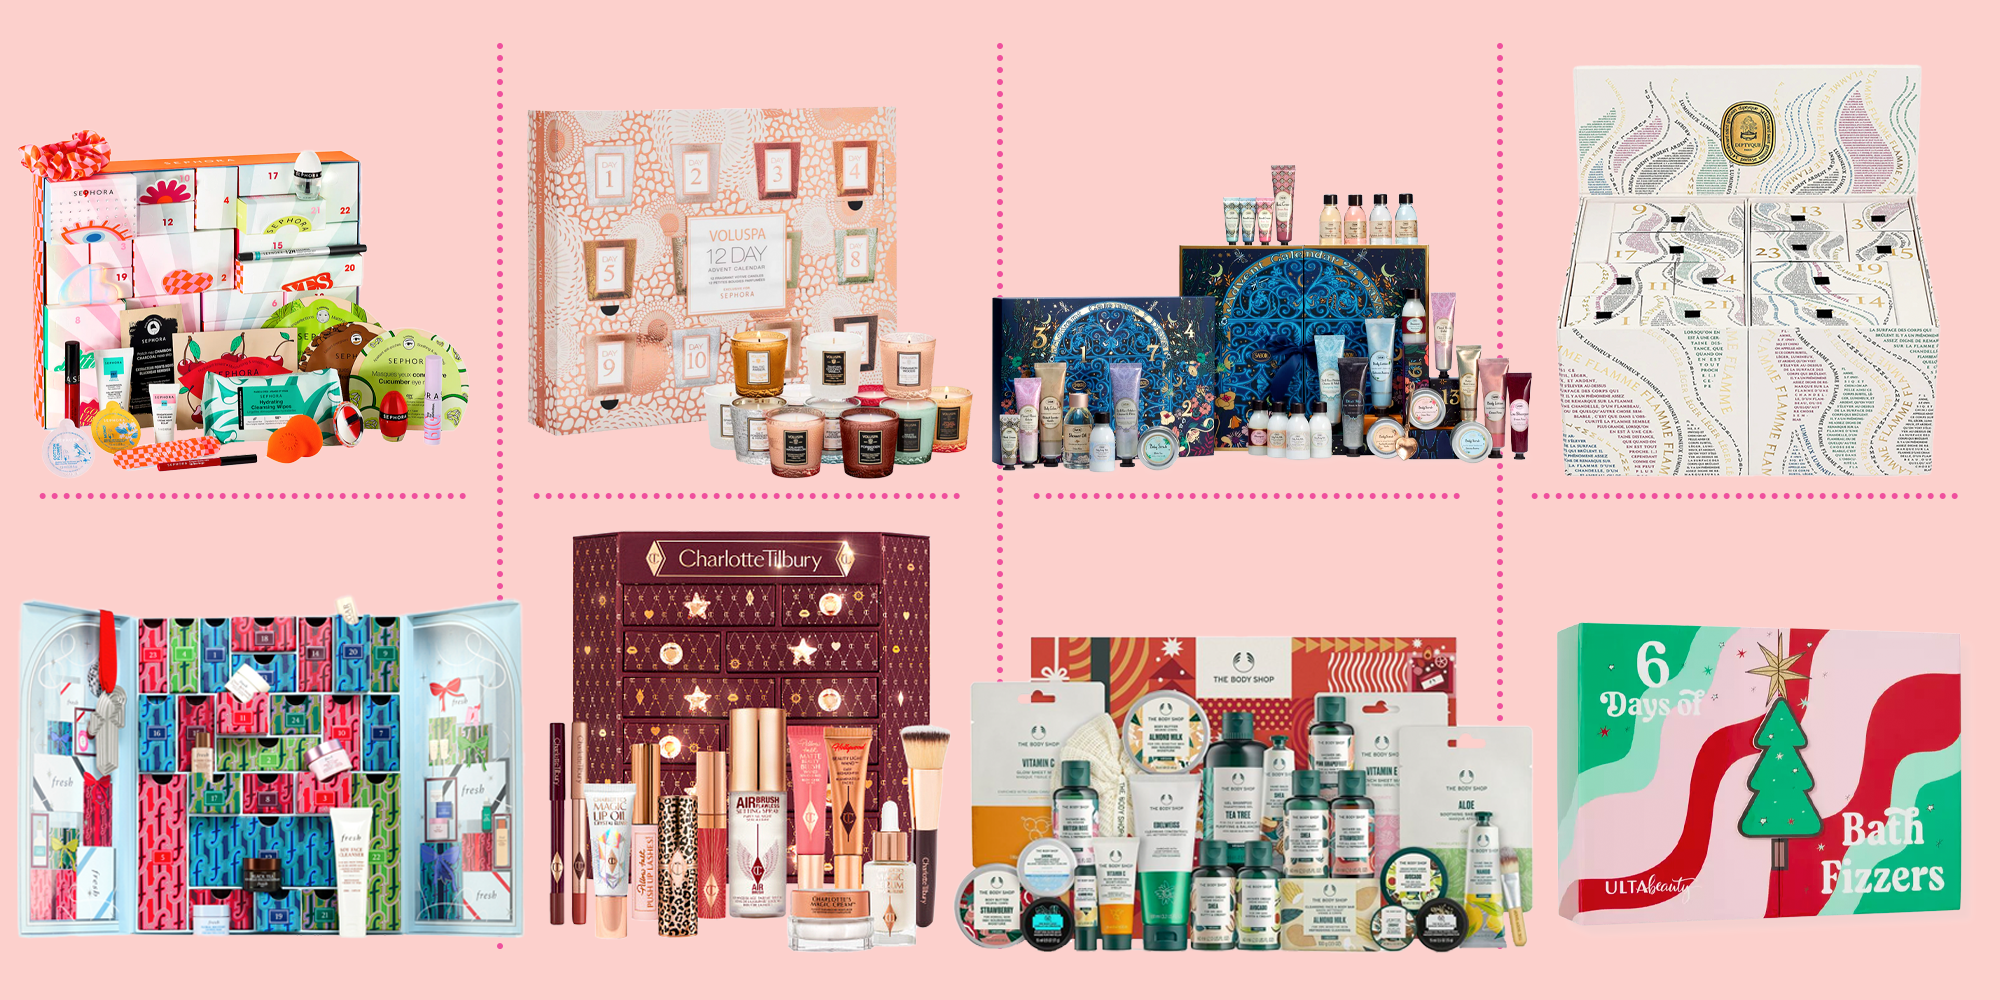 2020 Benefit Cosmetics Advent Calendar Available Now + Full